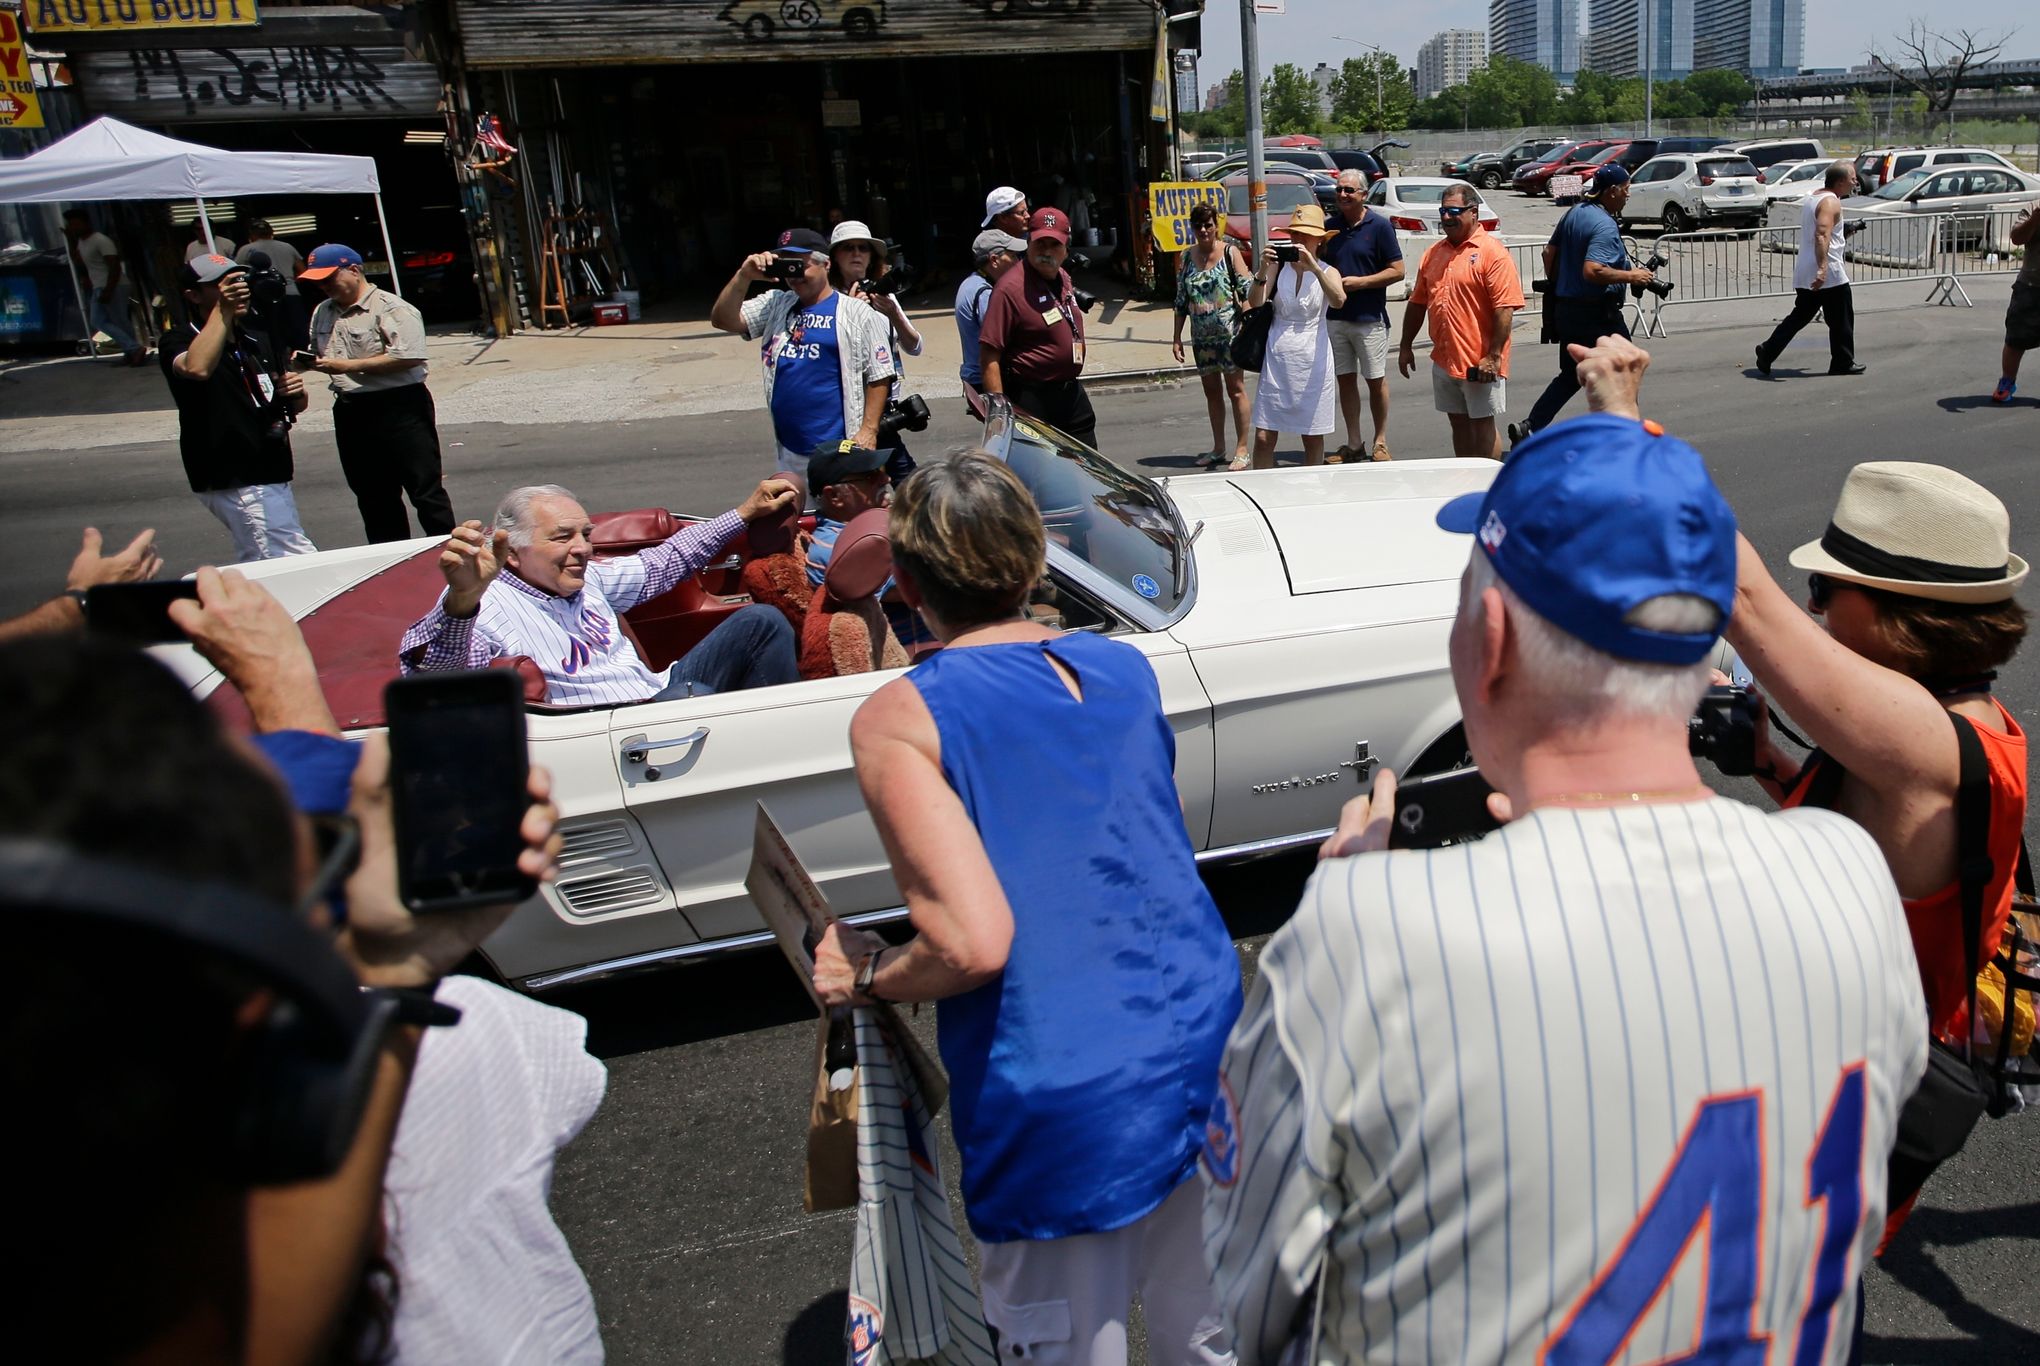 Mets to honor Tom Seaver with street renaming this Thursday at